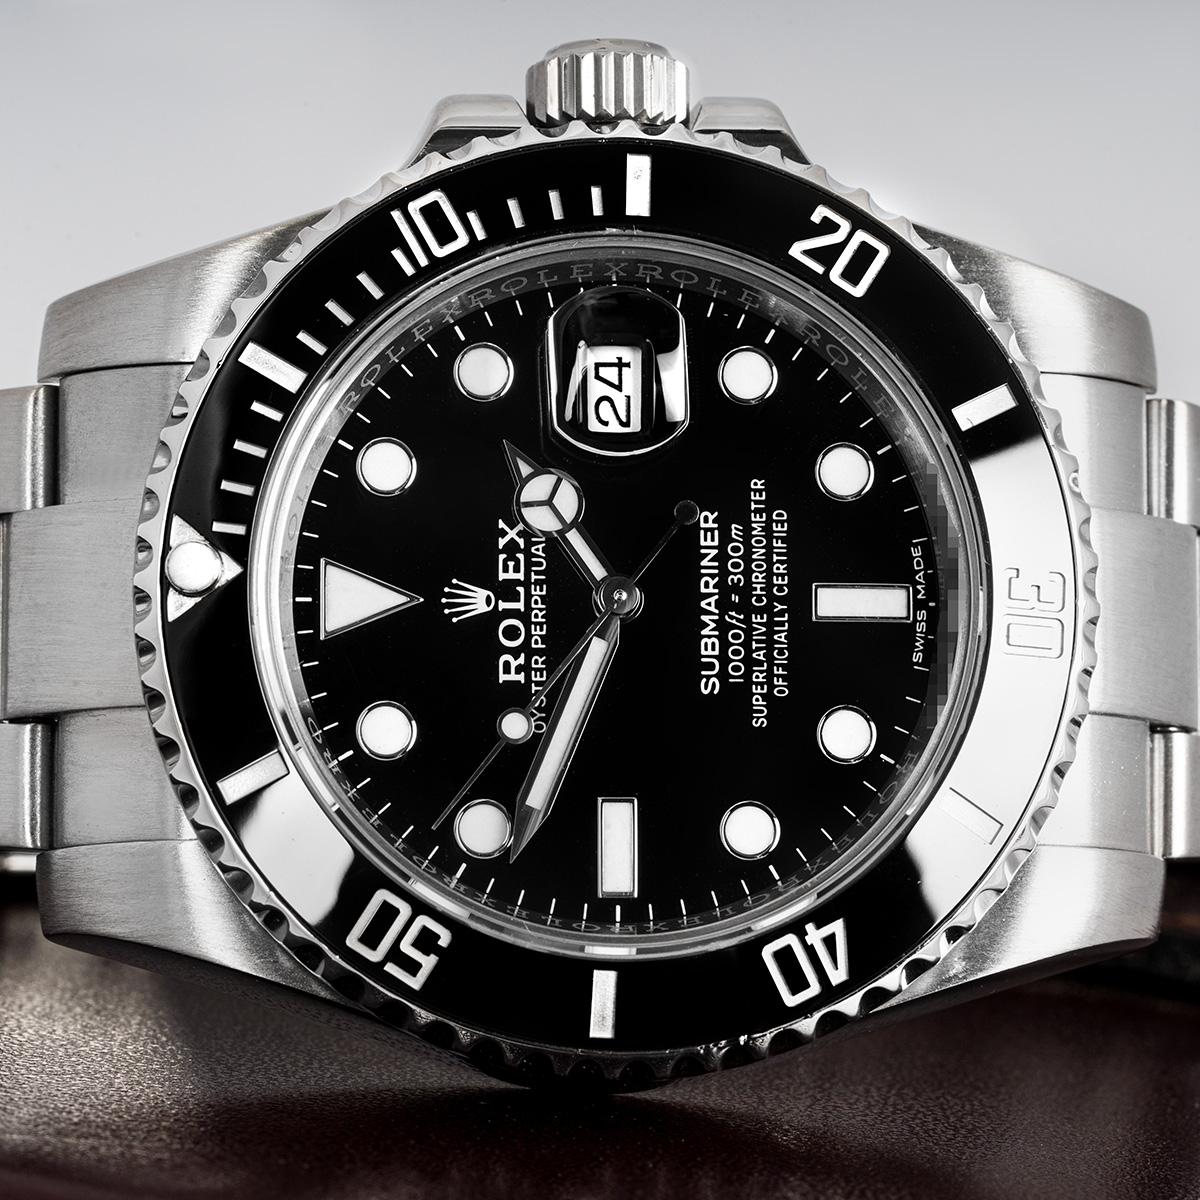 A 40mm Submariner Date in steel by Rolex. Featuring a black dial with a unidirectional rotating bezel and a black 60-minute graduation bezel insert.

Fitted with a scratch-resistant sapphire crystal and powered by a self-winding automatic movement.